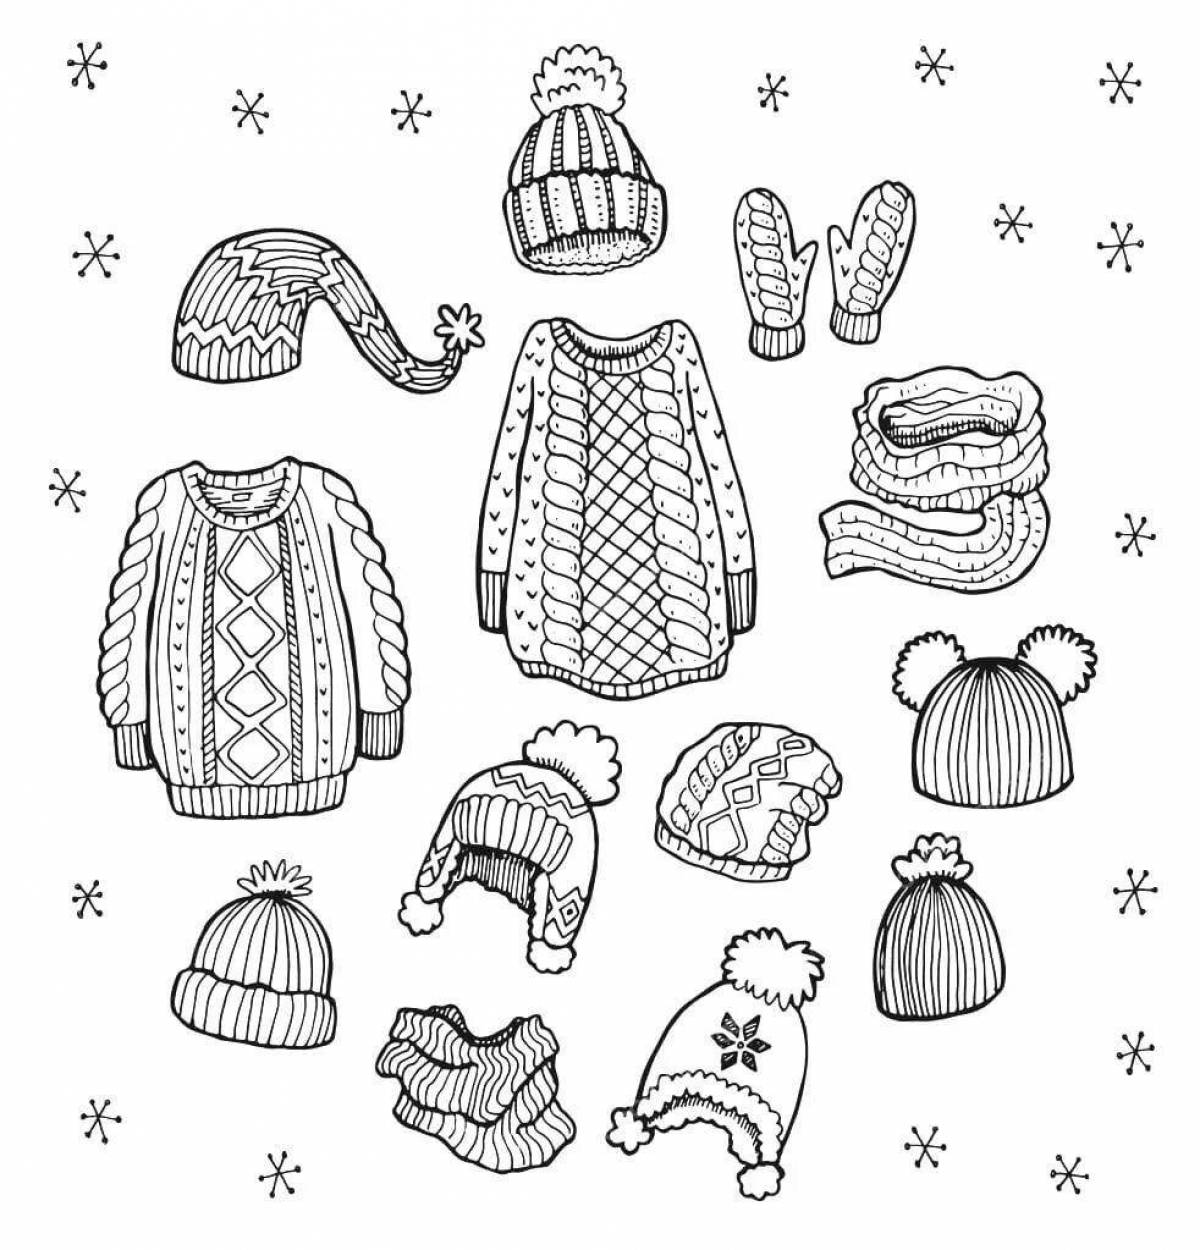 Fancy winter clothes coloring page